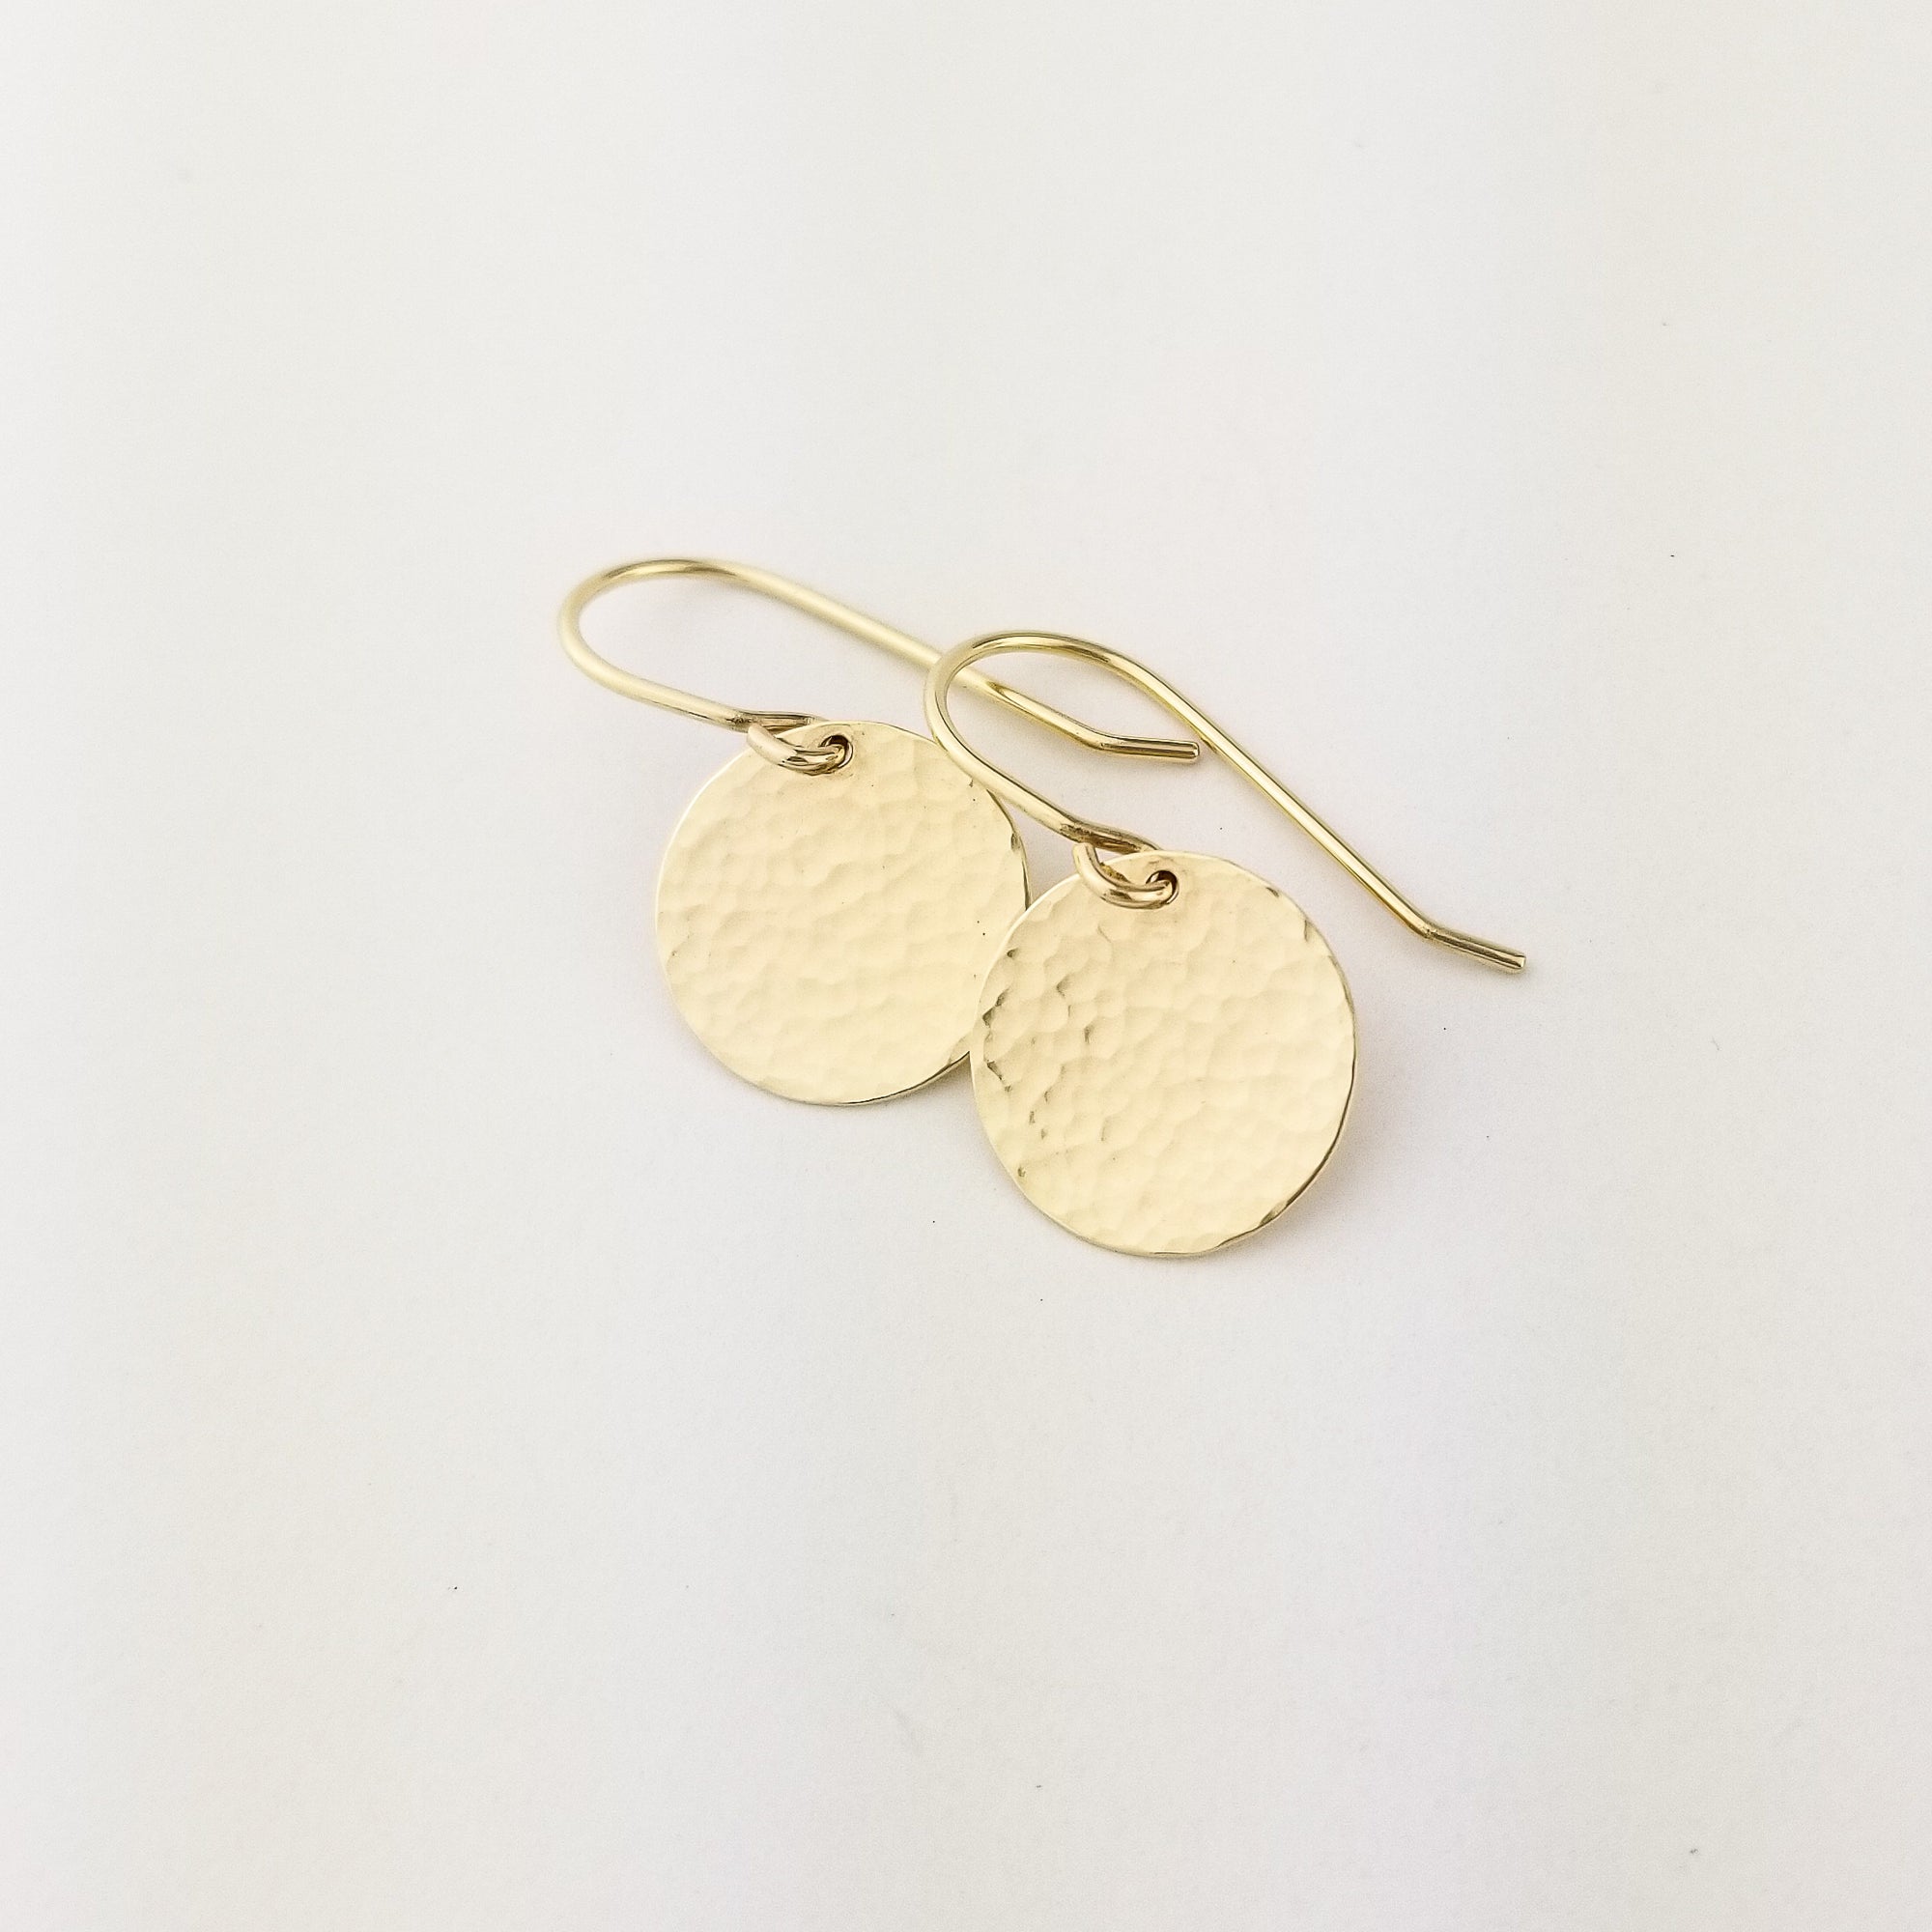 Solid 14 Karat Yellow Gold Hammered Flat Disc Earrings with 14 Karat Ear Wire on White Background